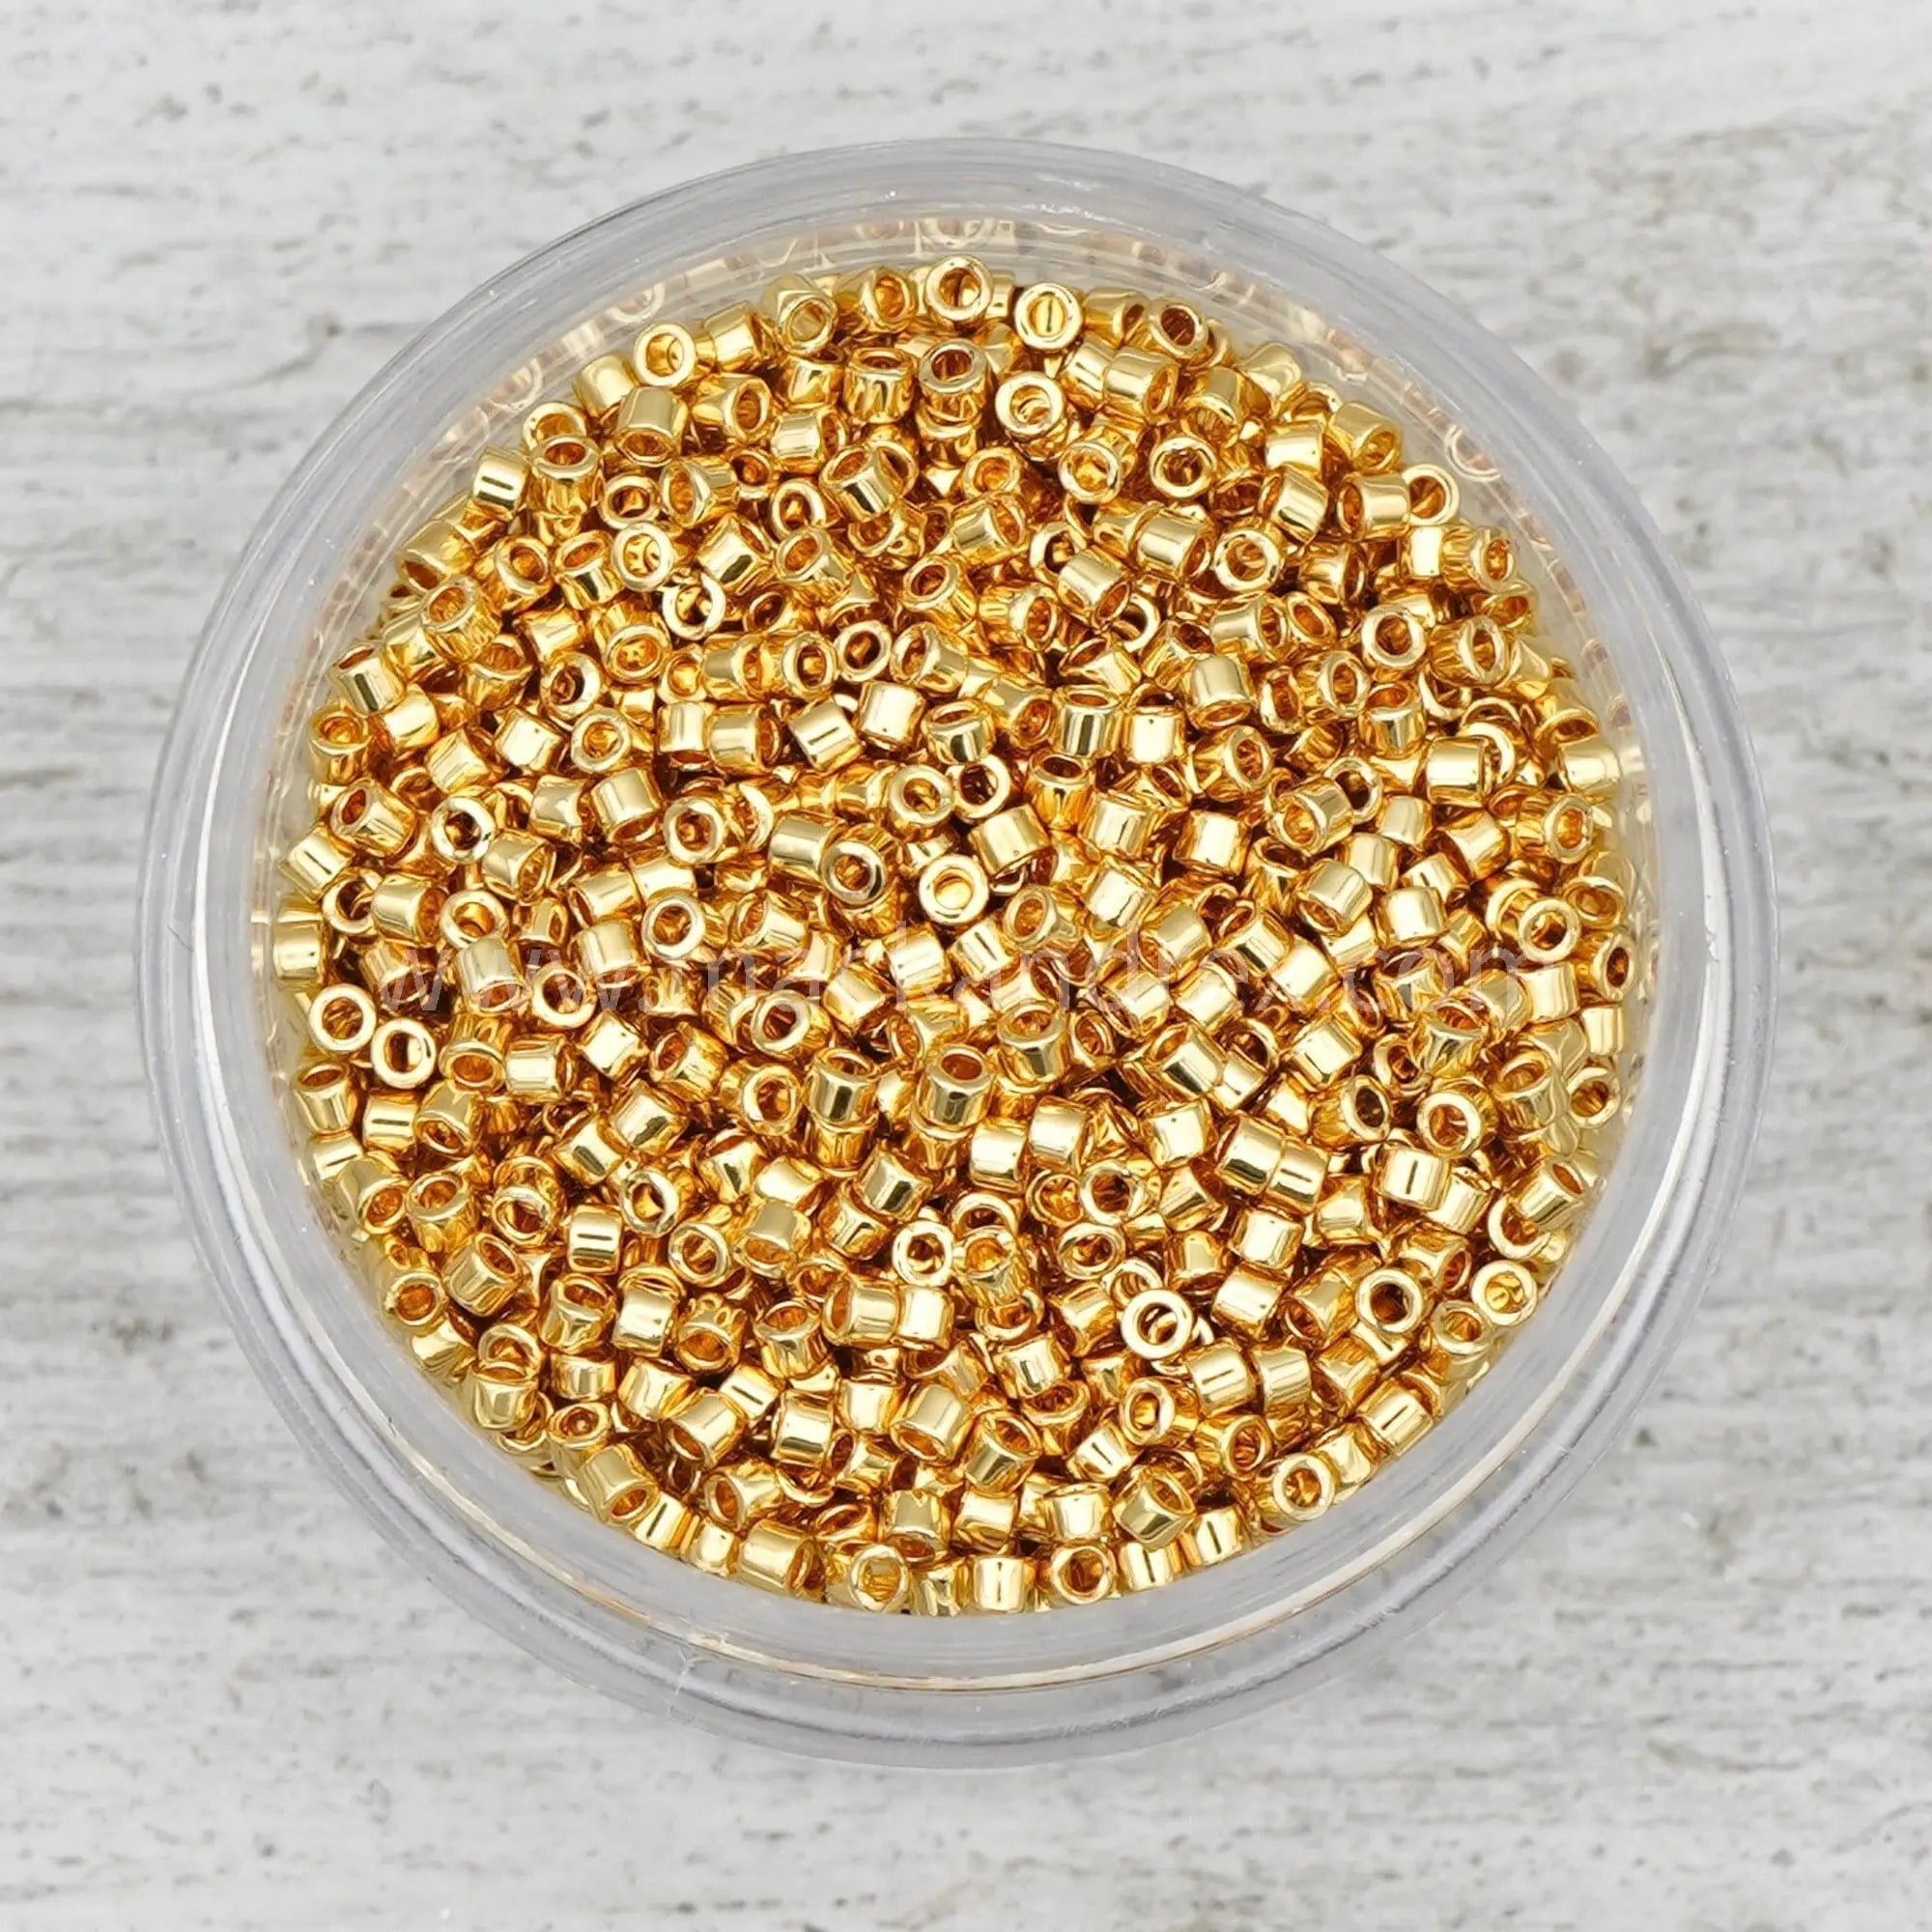 a bowl filled with gold colored beads